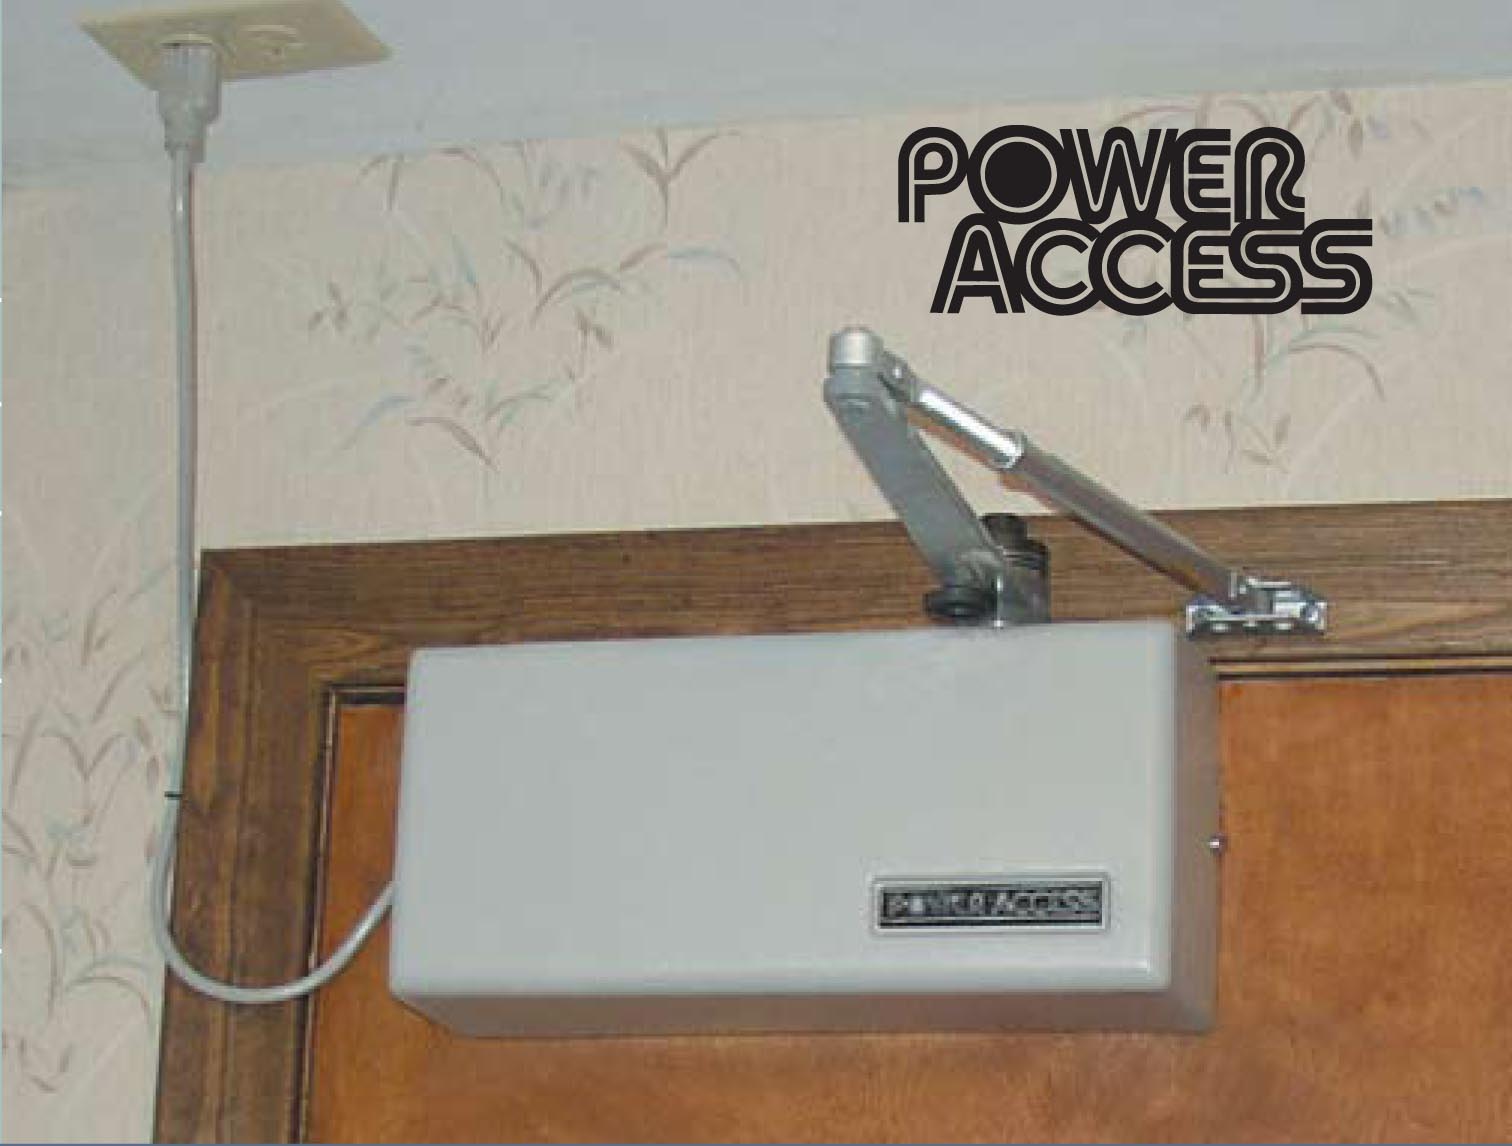 Automatic Door Opener Power Access 2300 for Disabled Access